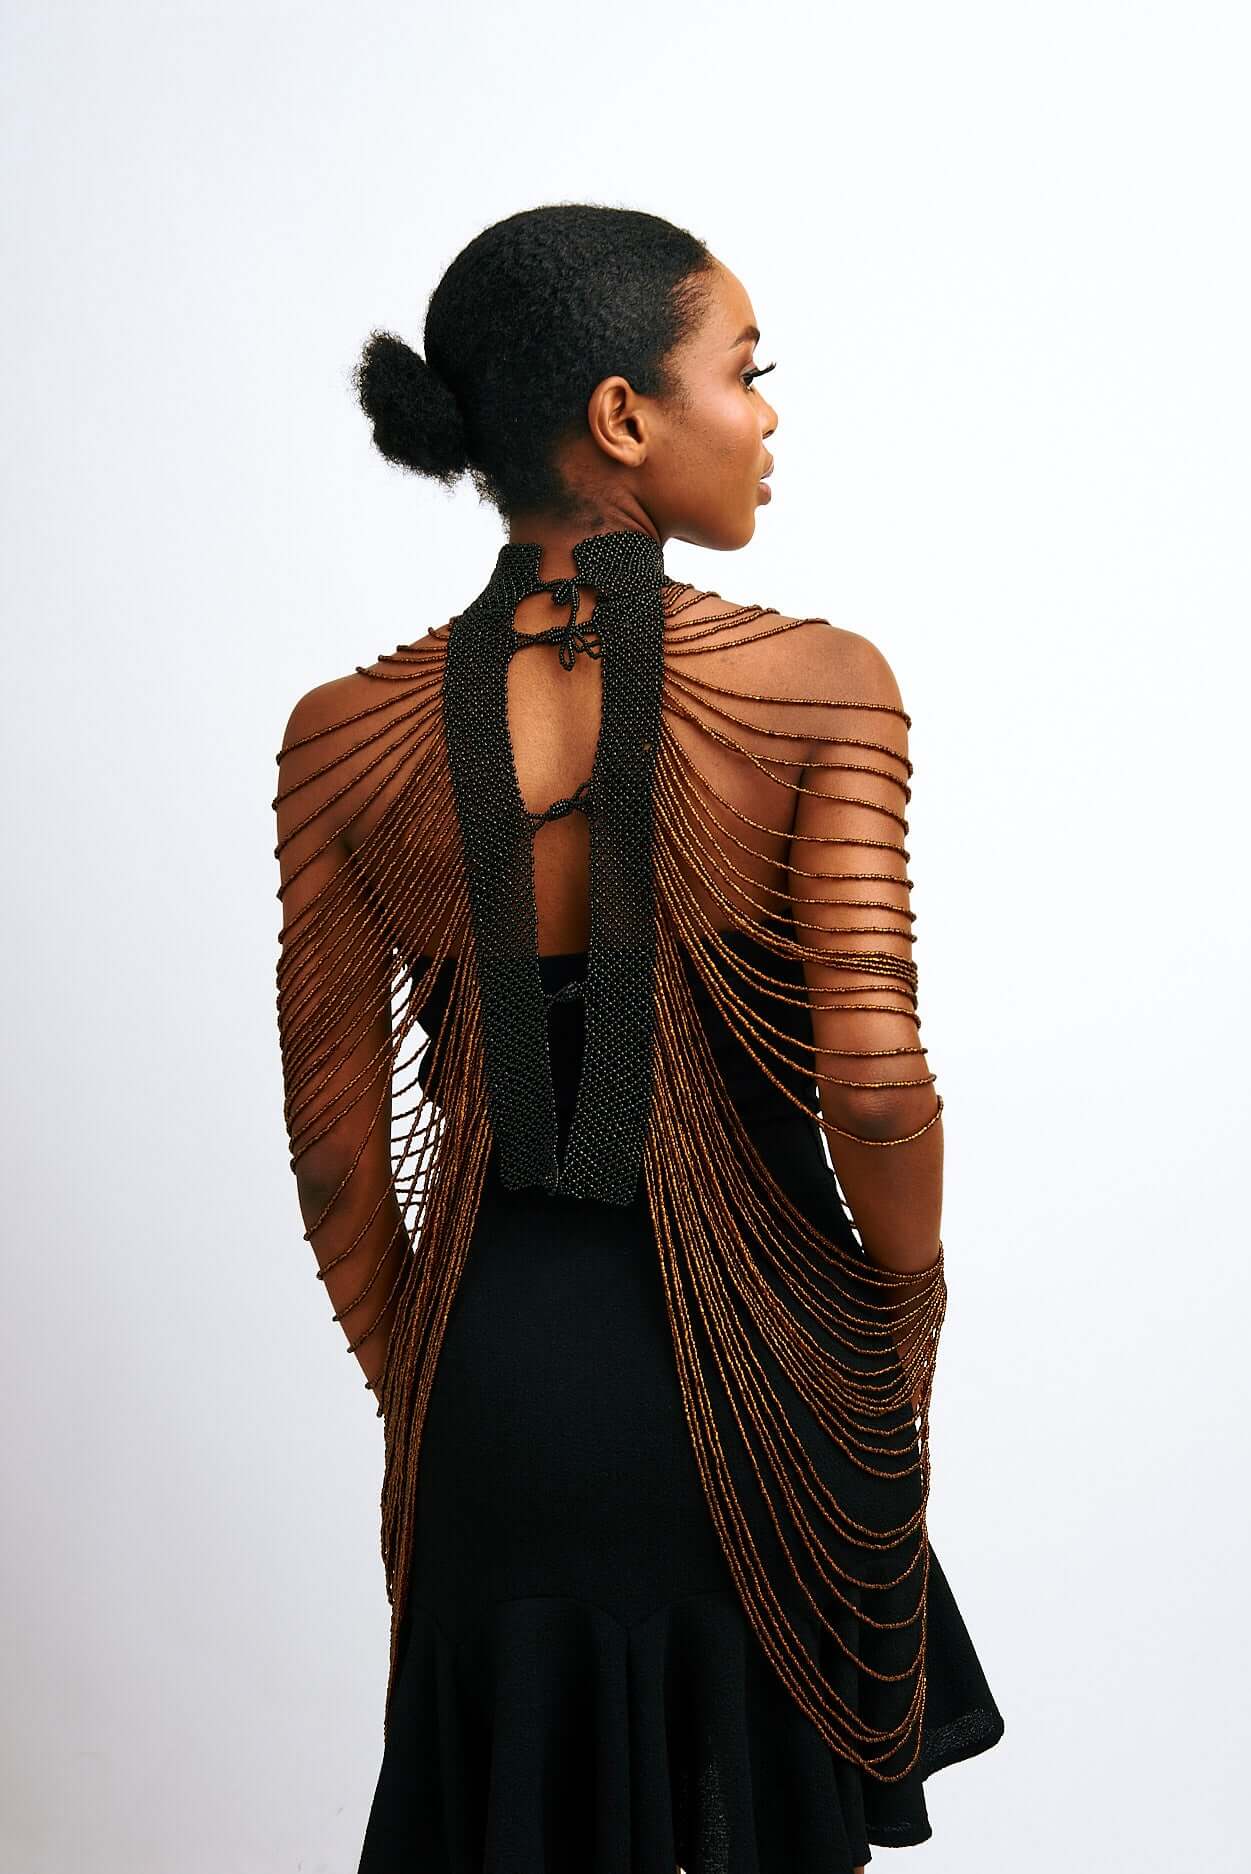 Shop Malkia Body Chain Piece by Epica Jewellery on Arrai. Discover stylish, affordable clothing, jewelry, handbags and unique handmade pieces from top Kenyan & African fashion brands prioritising sustainability and quality craftsmanship.